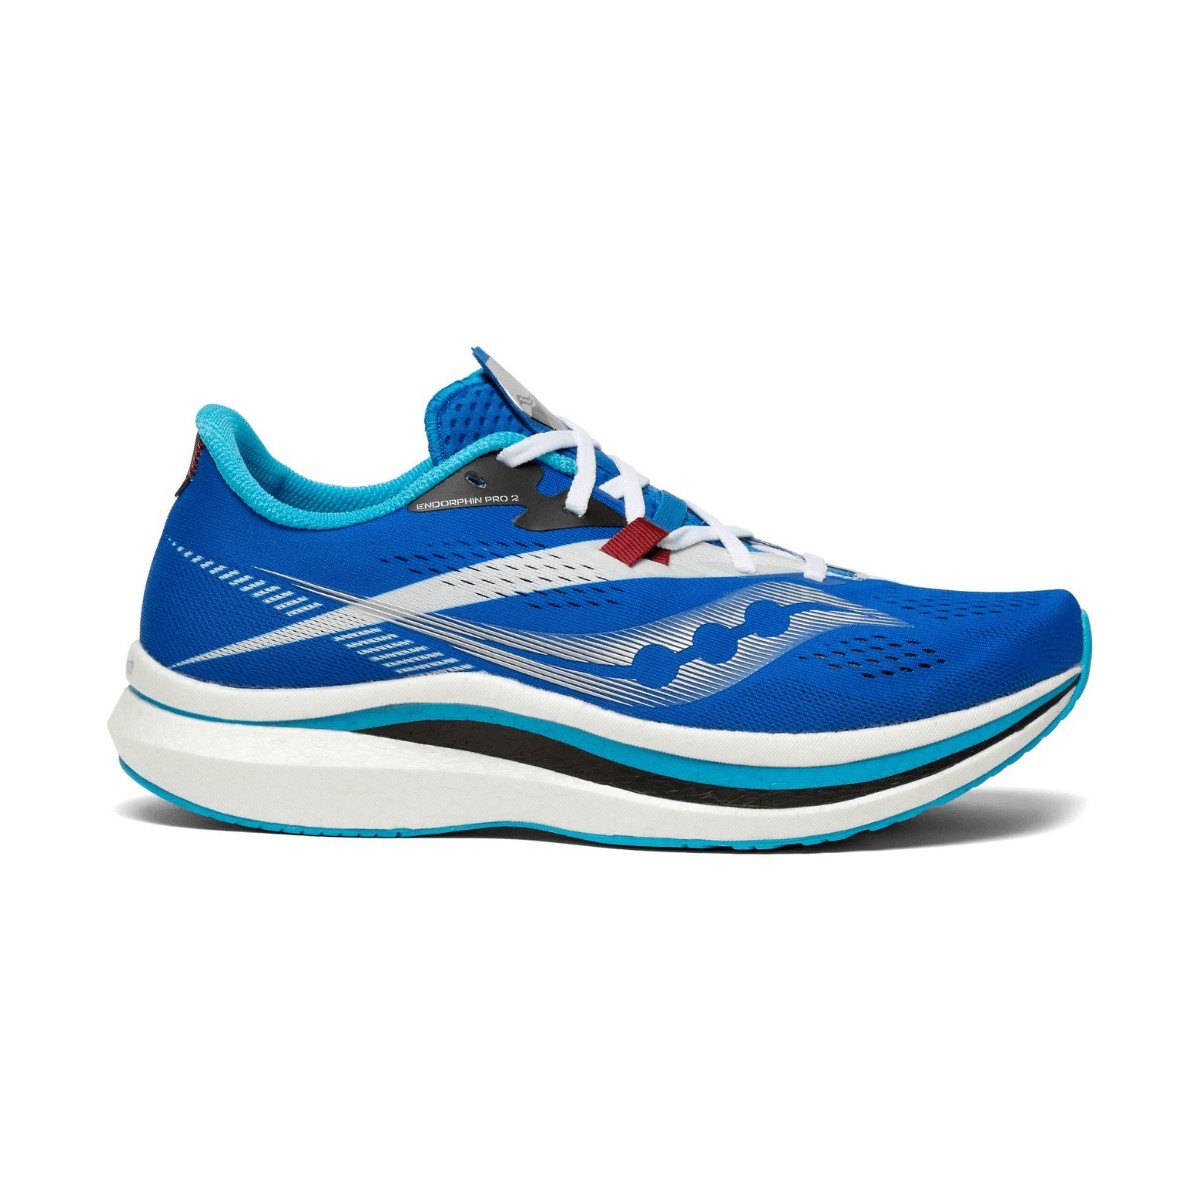 Saucony Endorphin Pro 2 Blue AW21 Running Shoes